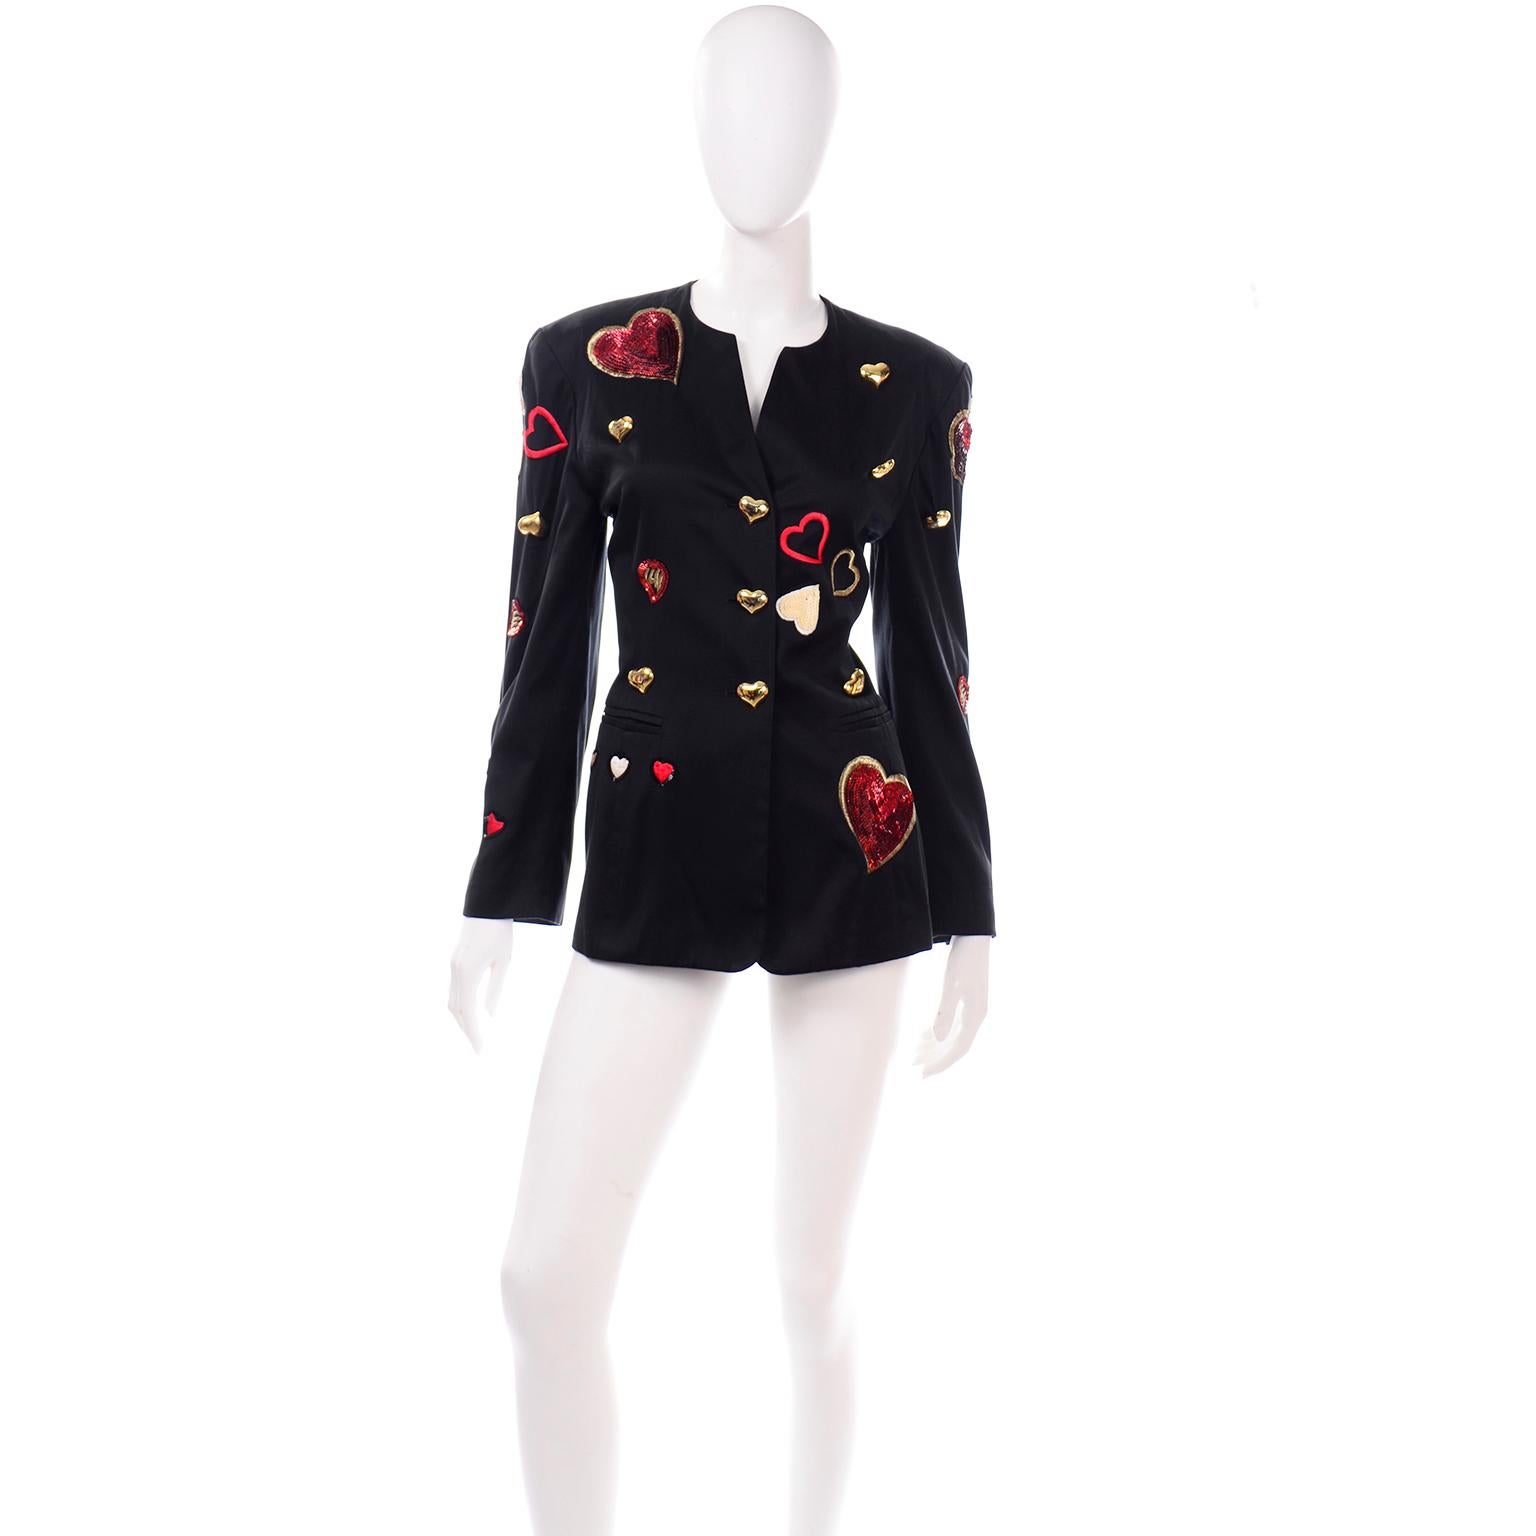 This amazing vintage 1980's Escada jacket is one of our favorites! Designed by Margaretha Ley in the 1980's, the blazer has fun gold metal heart buttons and is embroidered with gold hearts embellished with red, cream and white sequins.  Hearts were